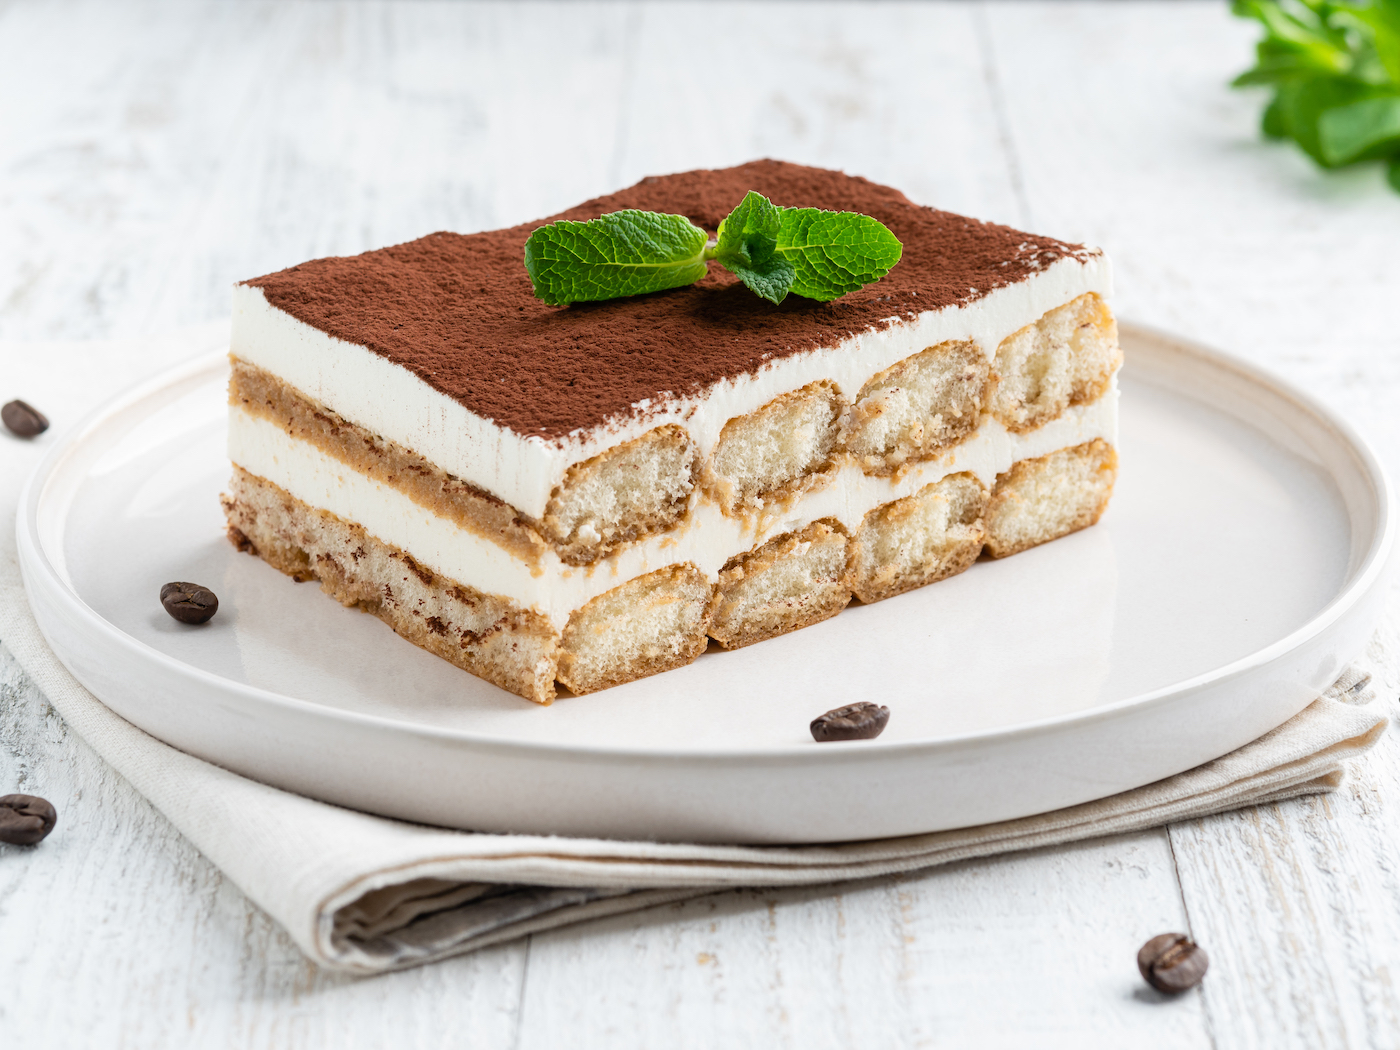 Piece of traditional italian dessert made of Lady fingers biscuits and mascarpone cream.